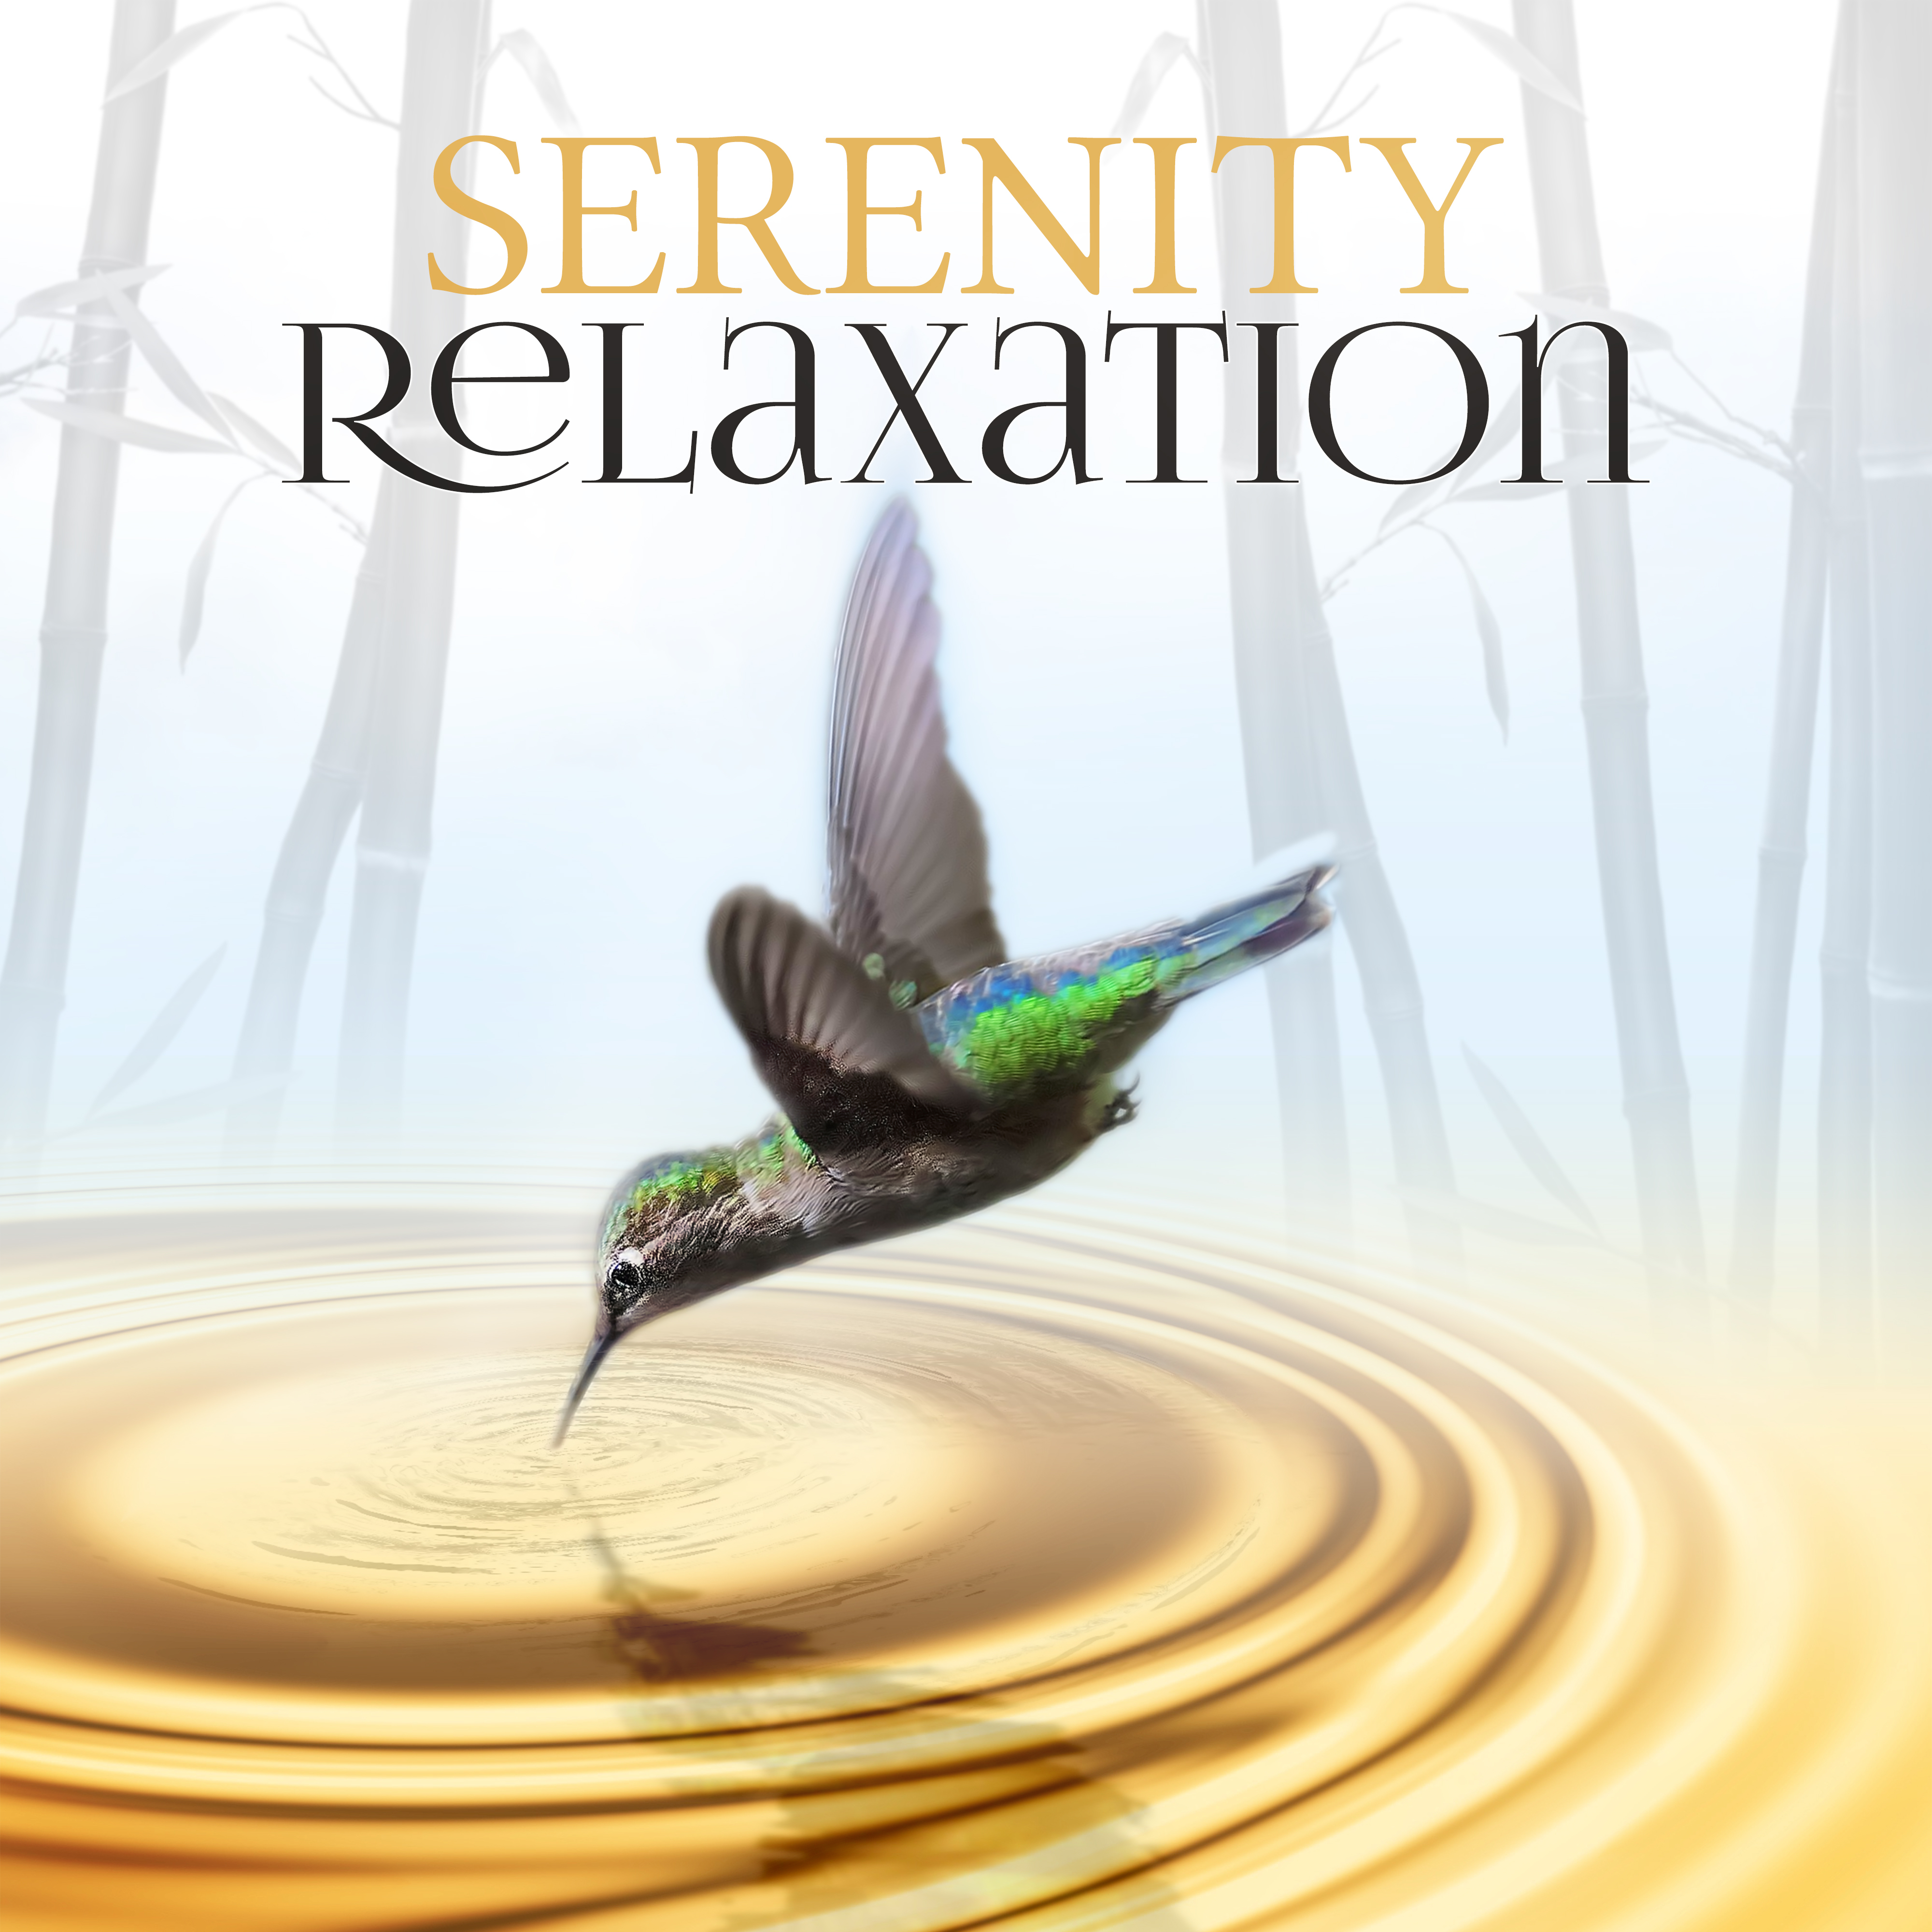 Serenity Relaxation – Deep Relaxation with Calm Background Music, Nature Sounds for Yoga, Massage, Reiki, Spa, Mindfulness Meditation